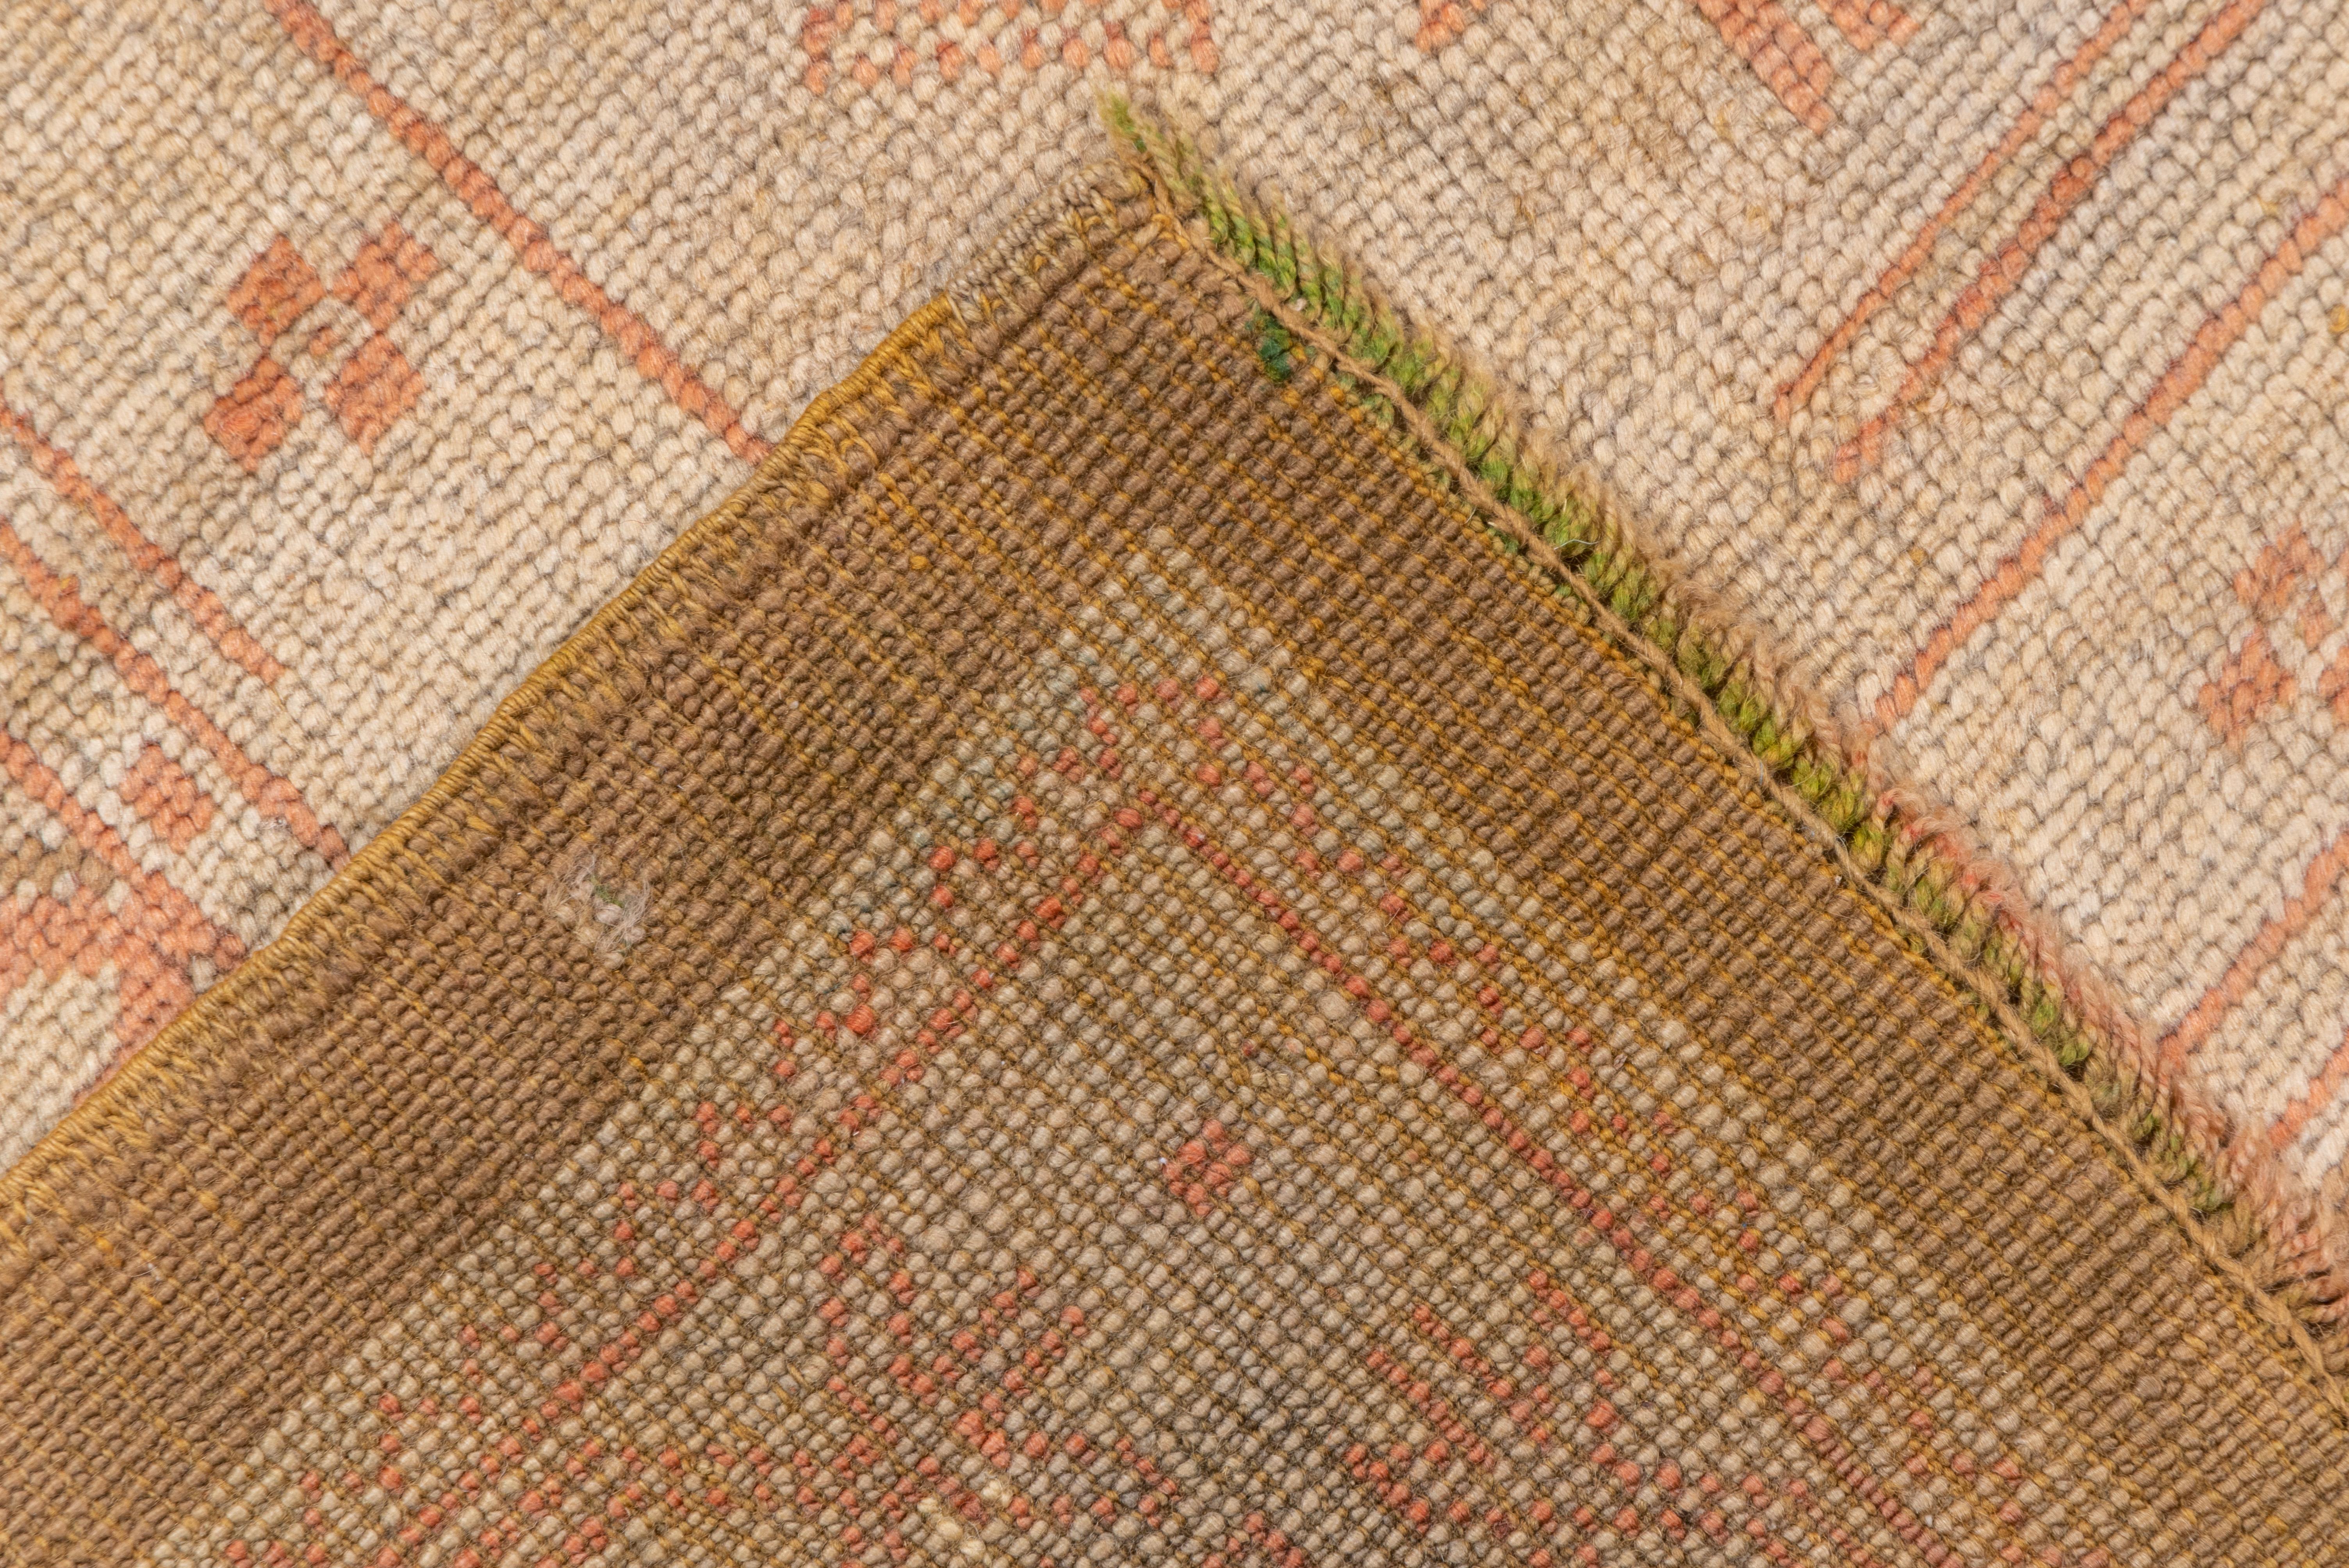 Antique Oushak Rug, Olive Brown Field, Orange Accents In Good Condition For Sale In New York, NY